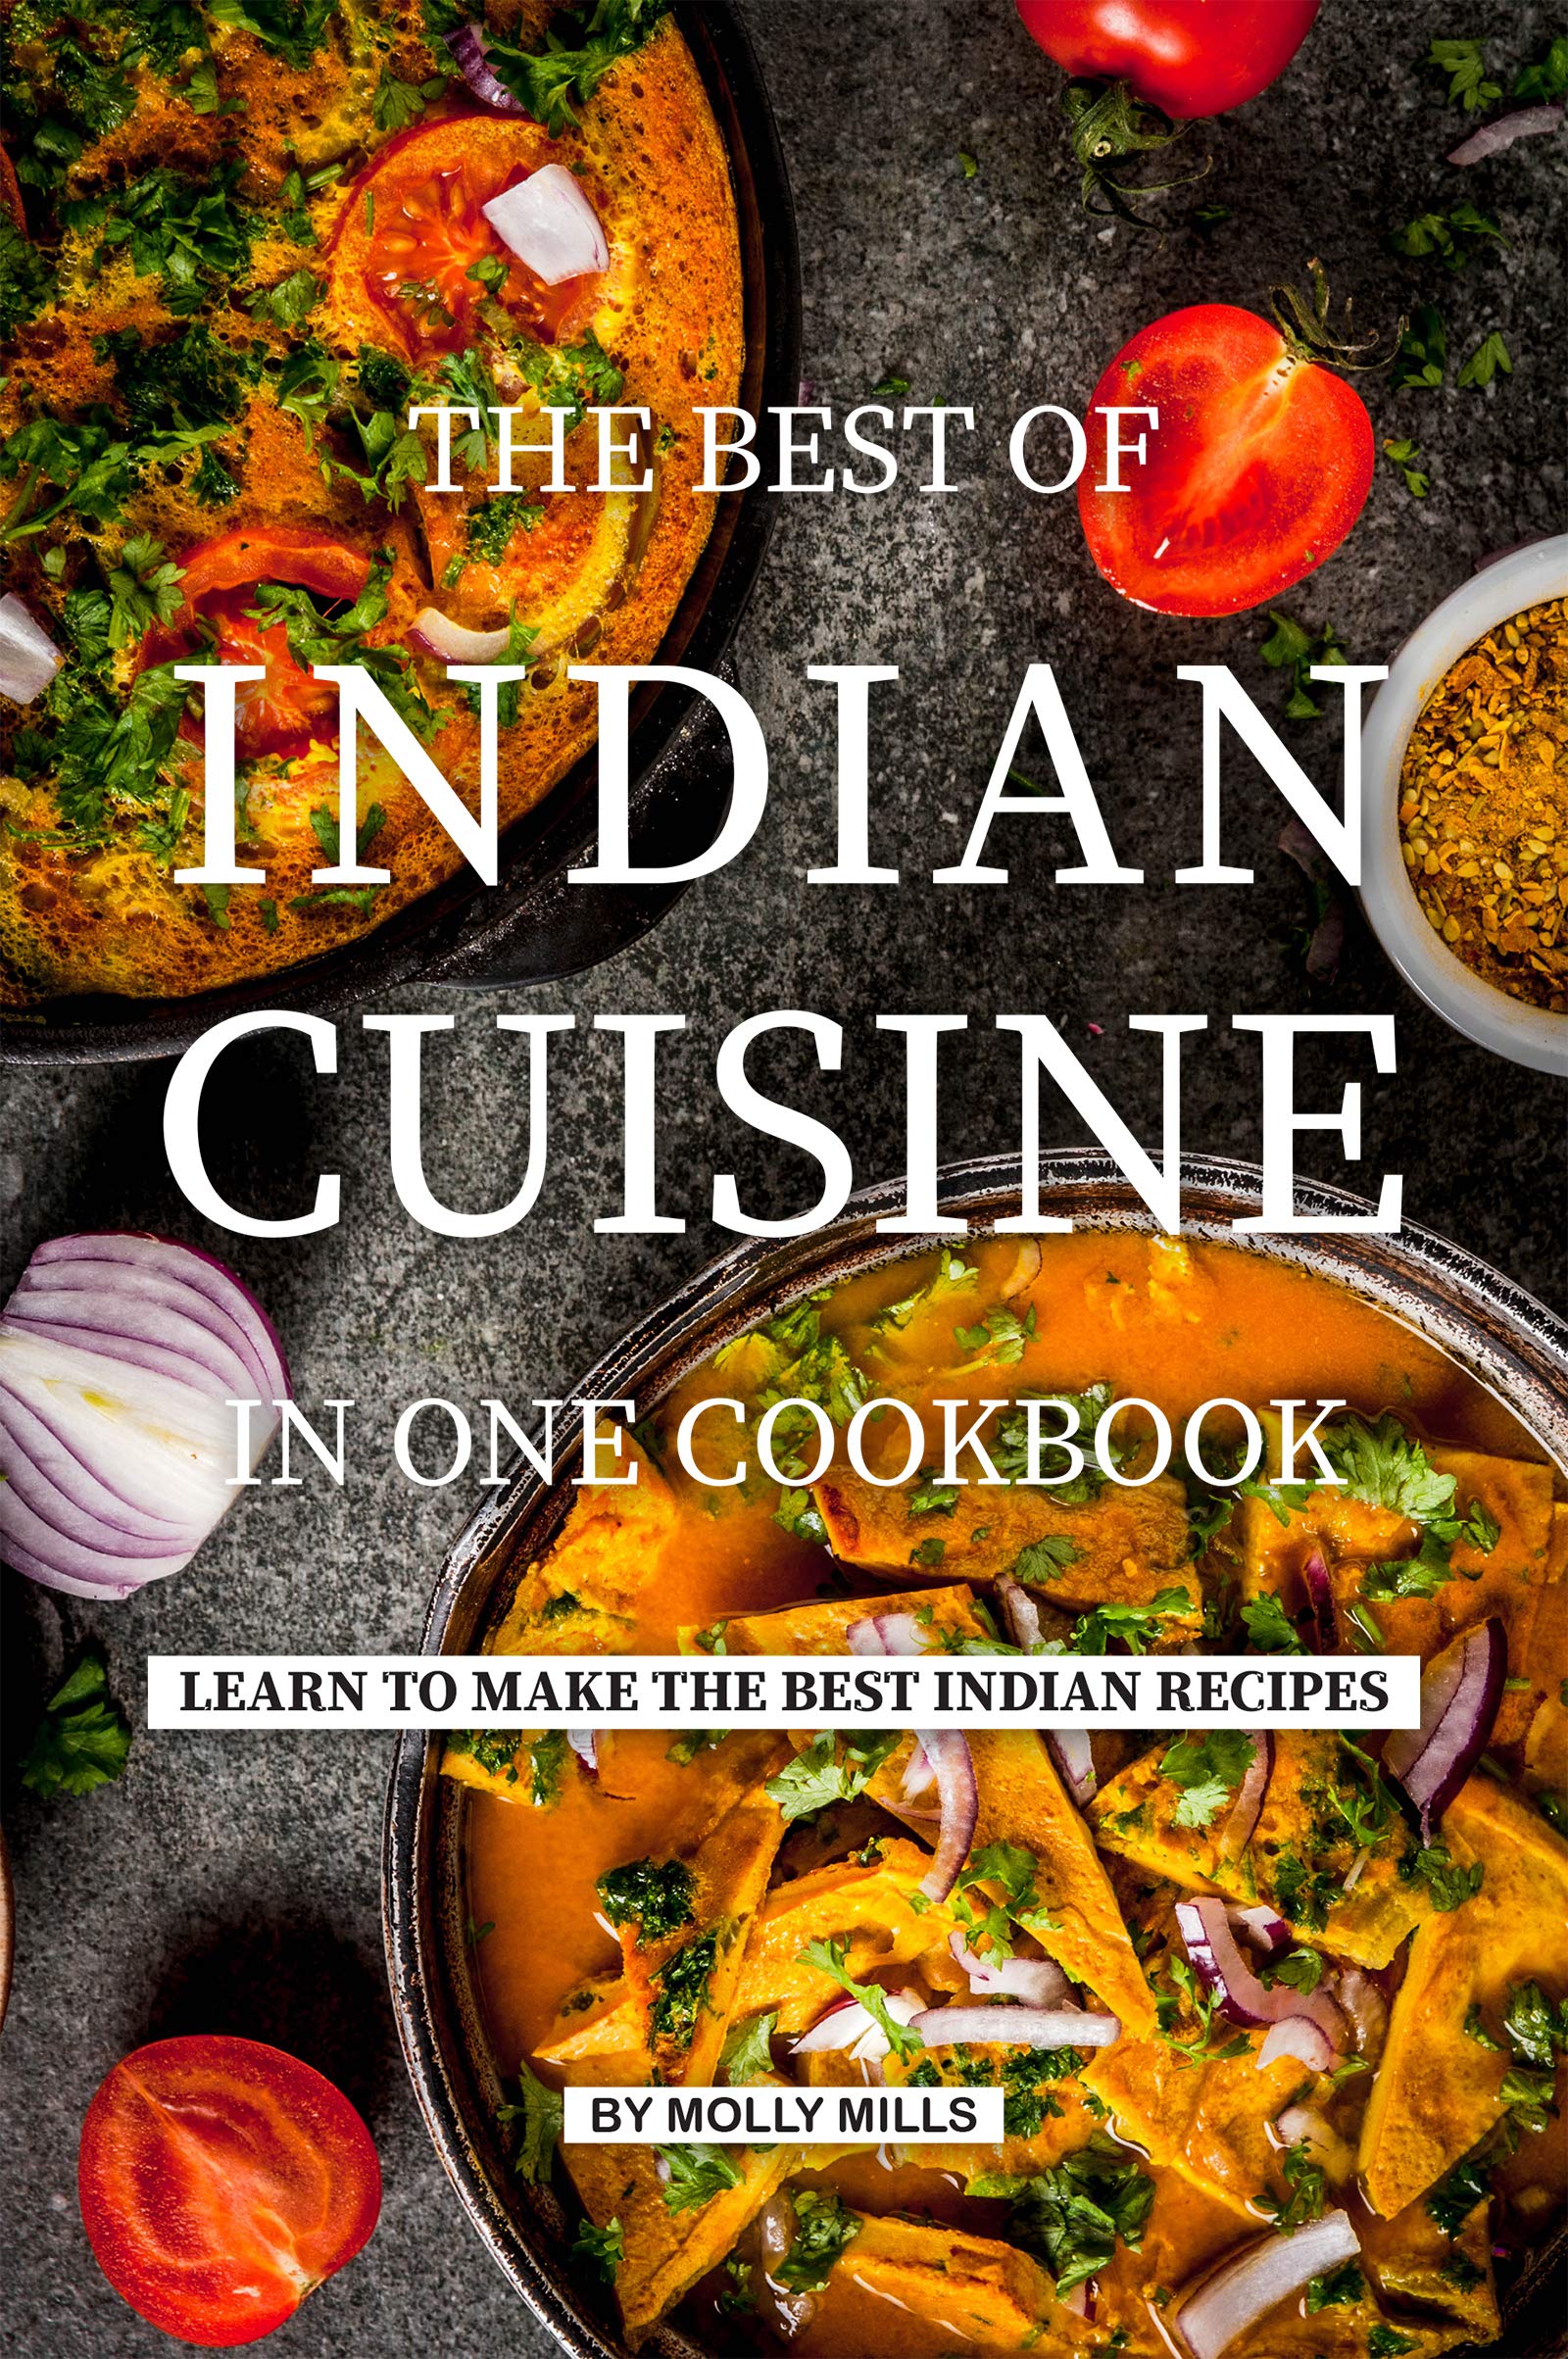 The Best of Indian Cuisine in one Cookbook